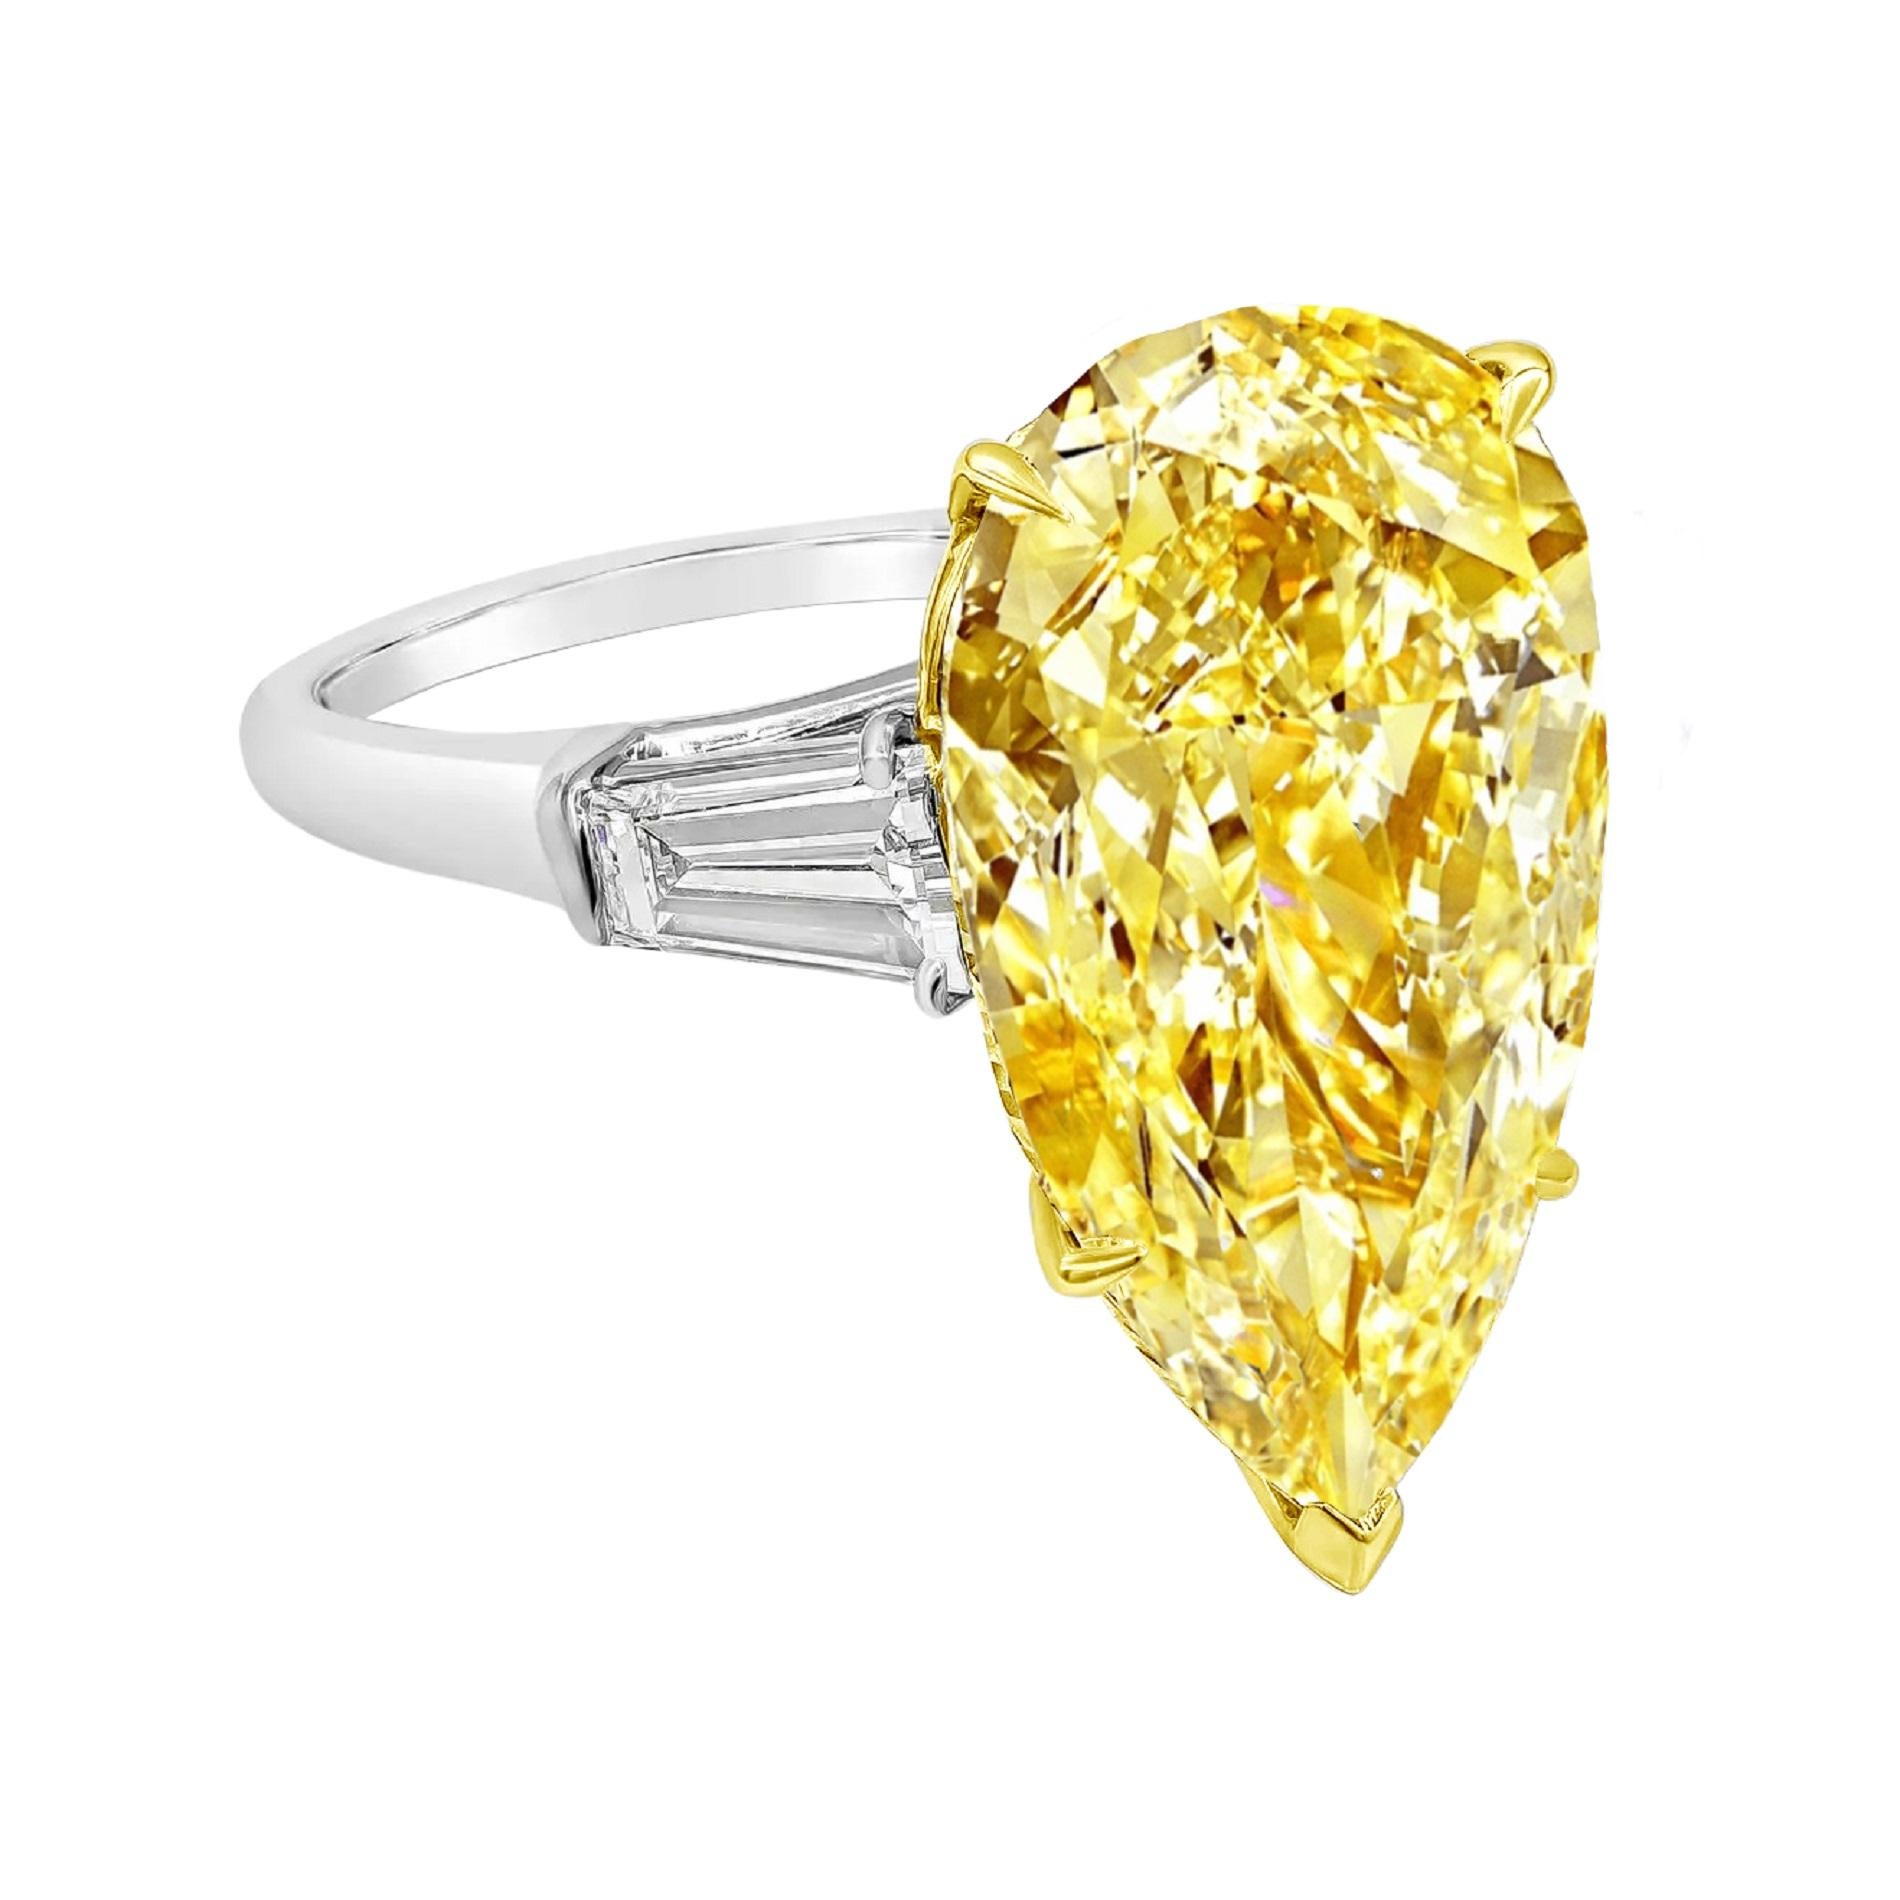 Contemporary GIA Certified Fancy Intense Yellow 11 Carat Pear Cut Diamond Ring For Sale